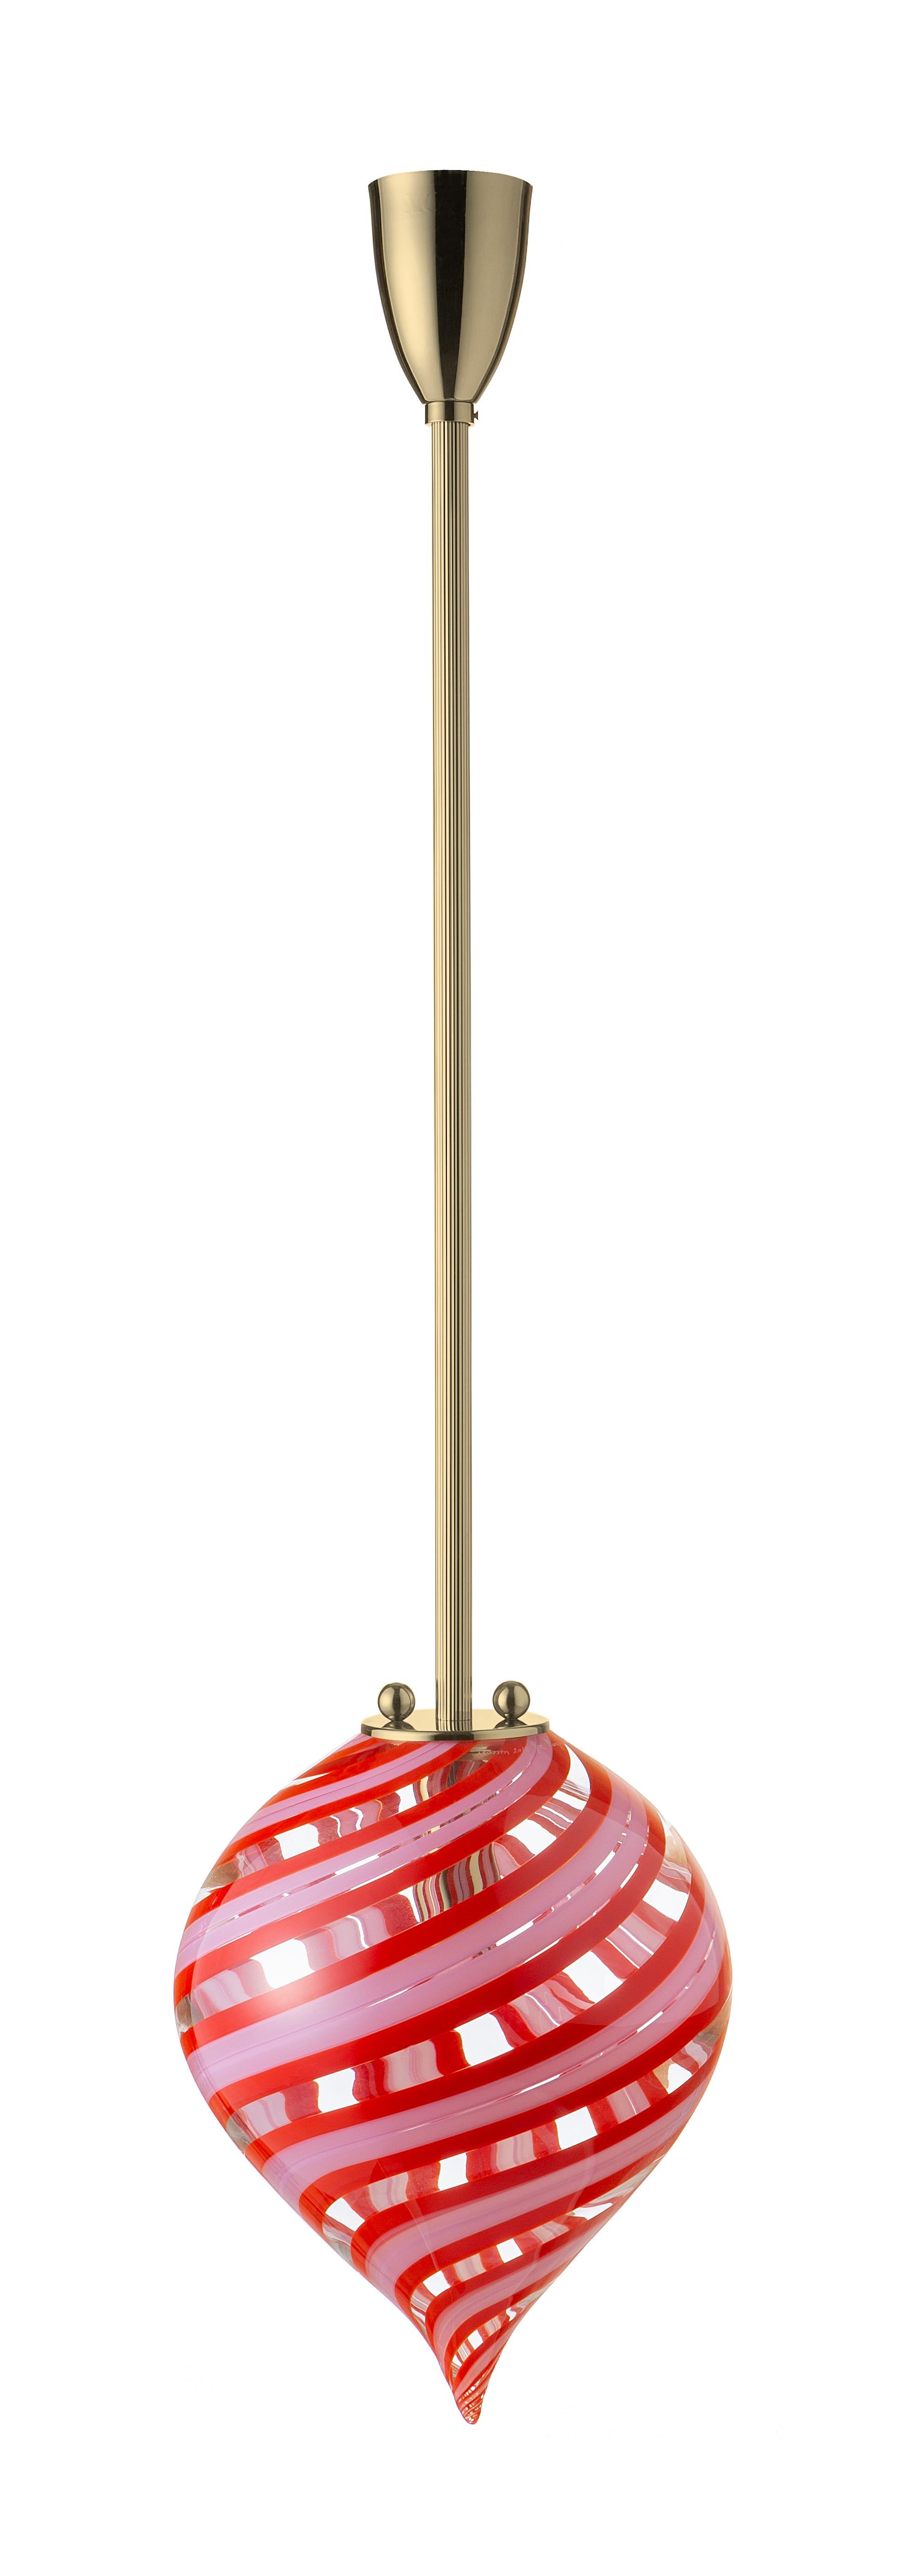 Rosa Rosso pendant balloon canne by Magic Circus Editions
Dimensions: H 36 x W 27 x D 27 cm
Materials: fluted brass, mouth-blown glass
Colour: viola

Available finishes: Brass, nickel
Available colors: rosa rosso, senape bianco, blu, senape